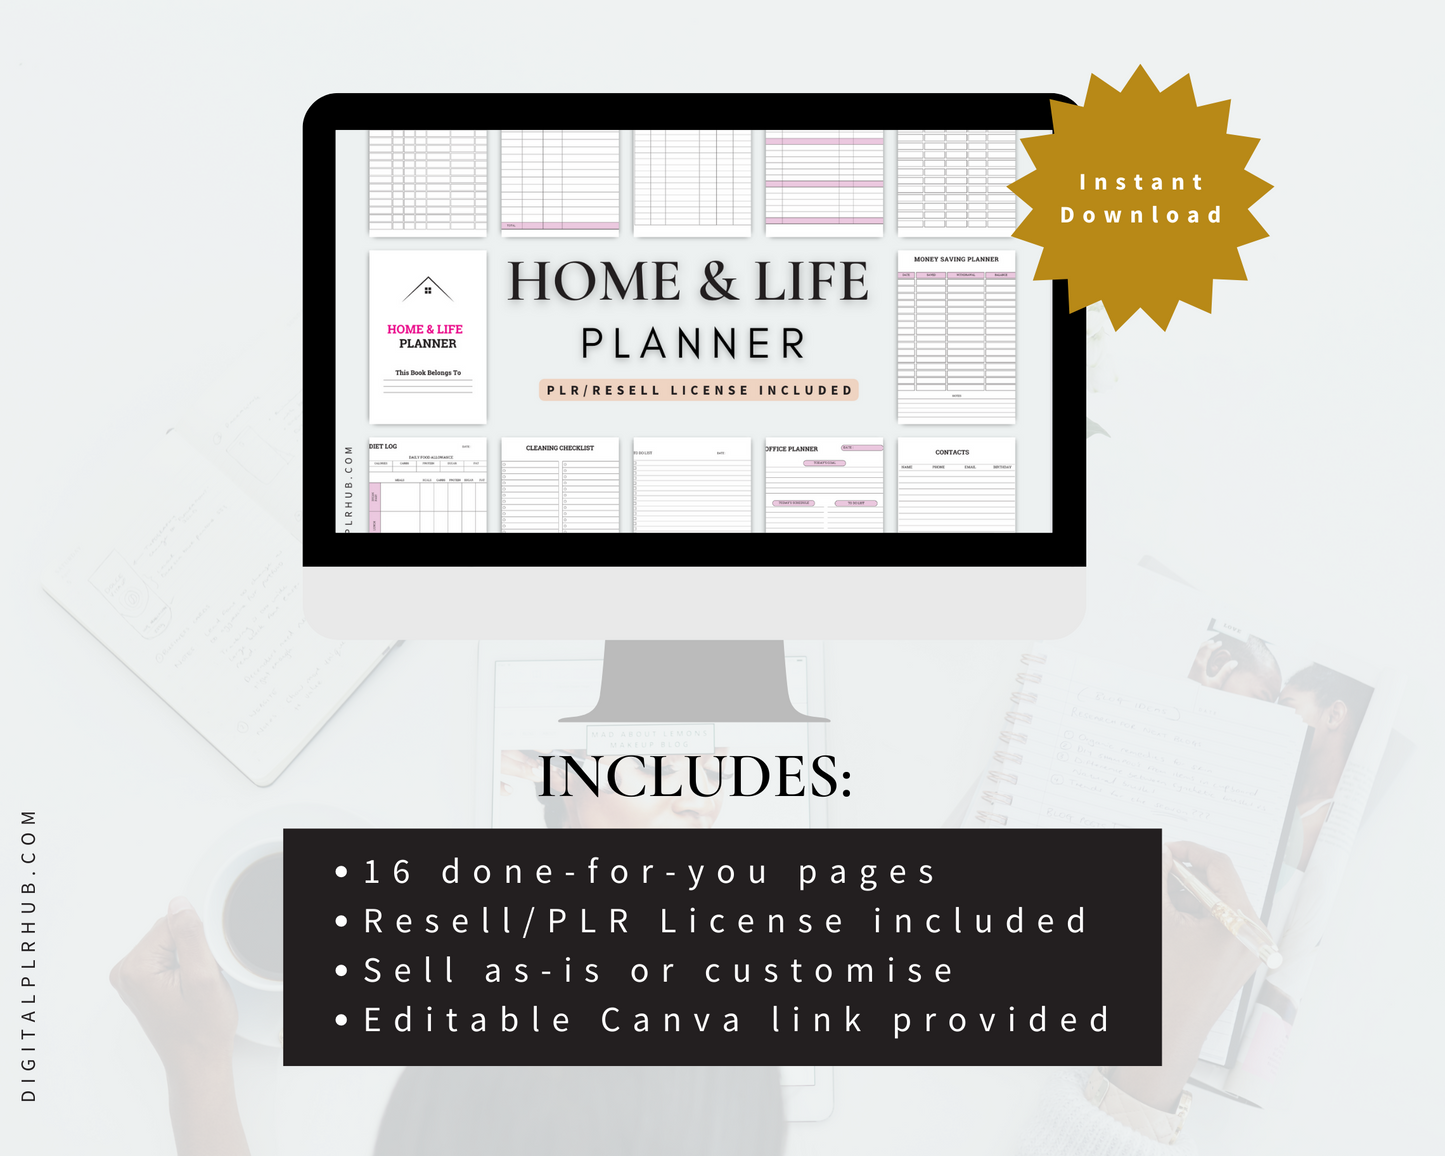 Home & Life Planner